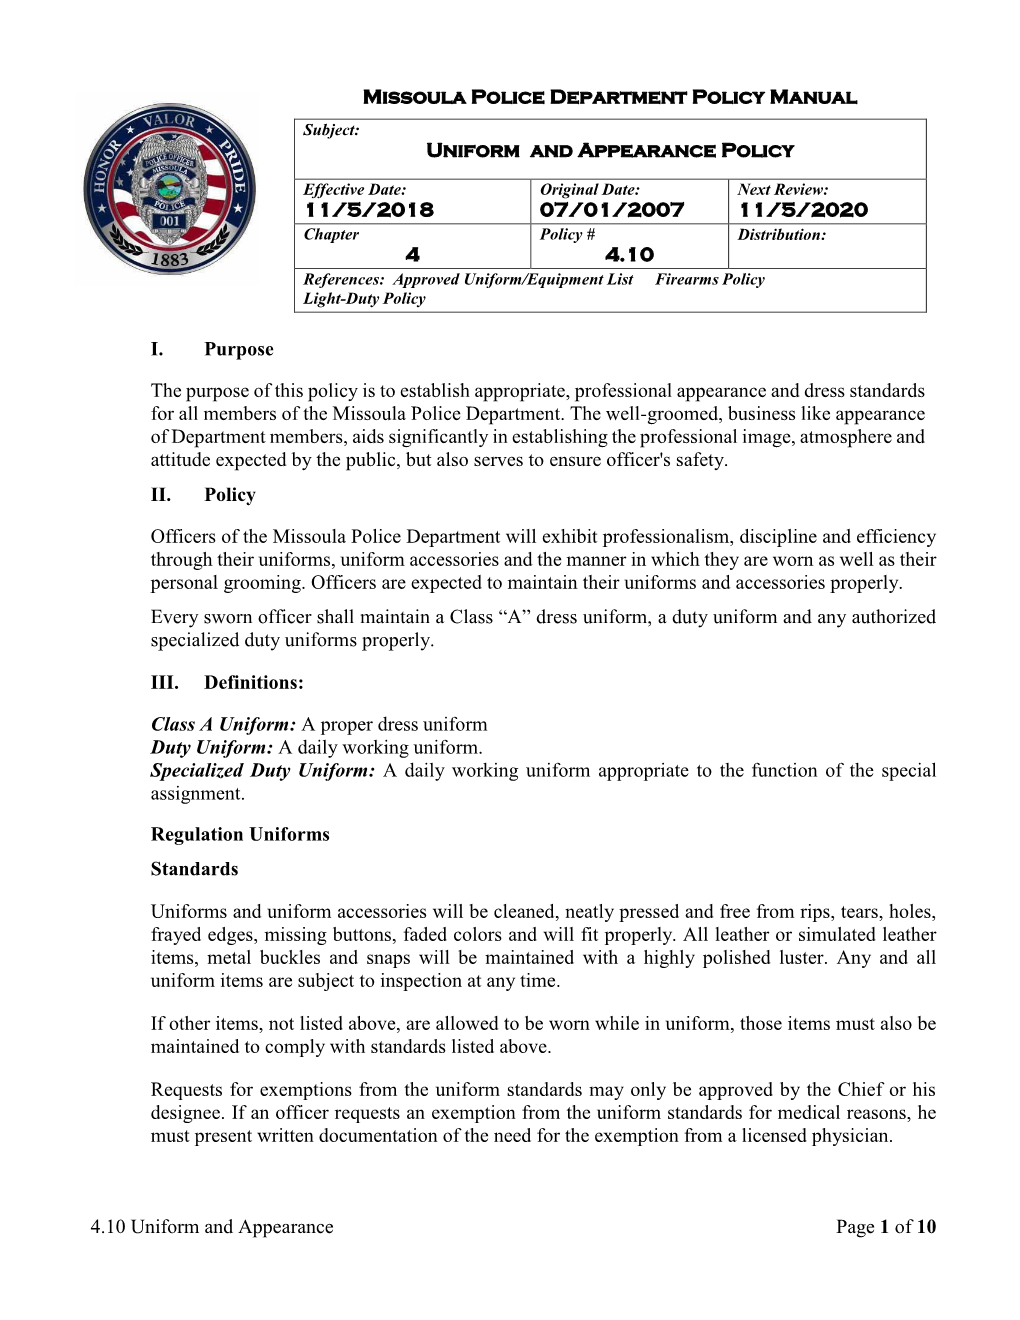 4.10 Uniform and Appearance Page 1 of 10 Missoula Police Department